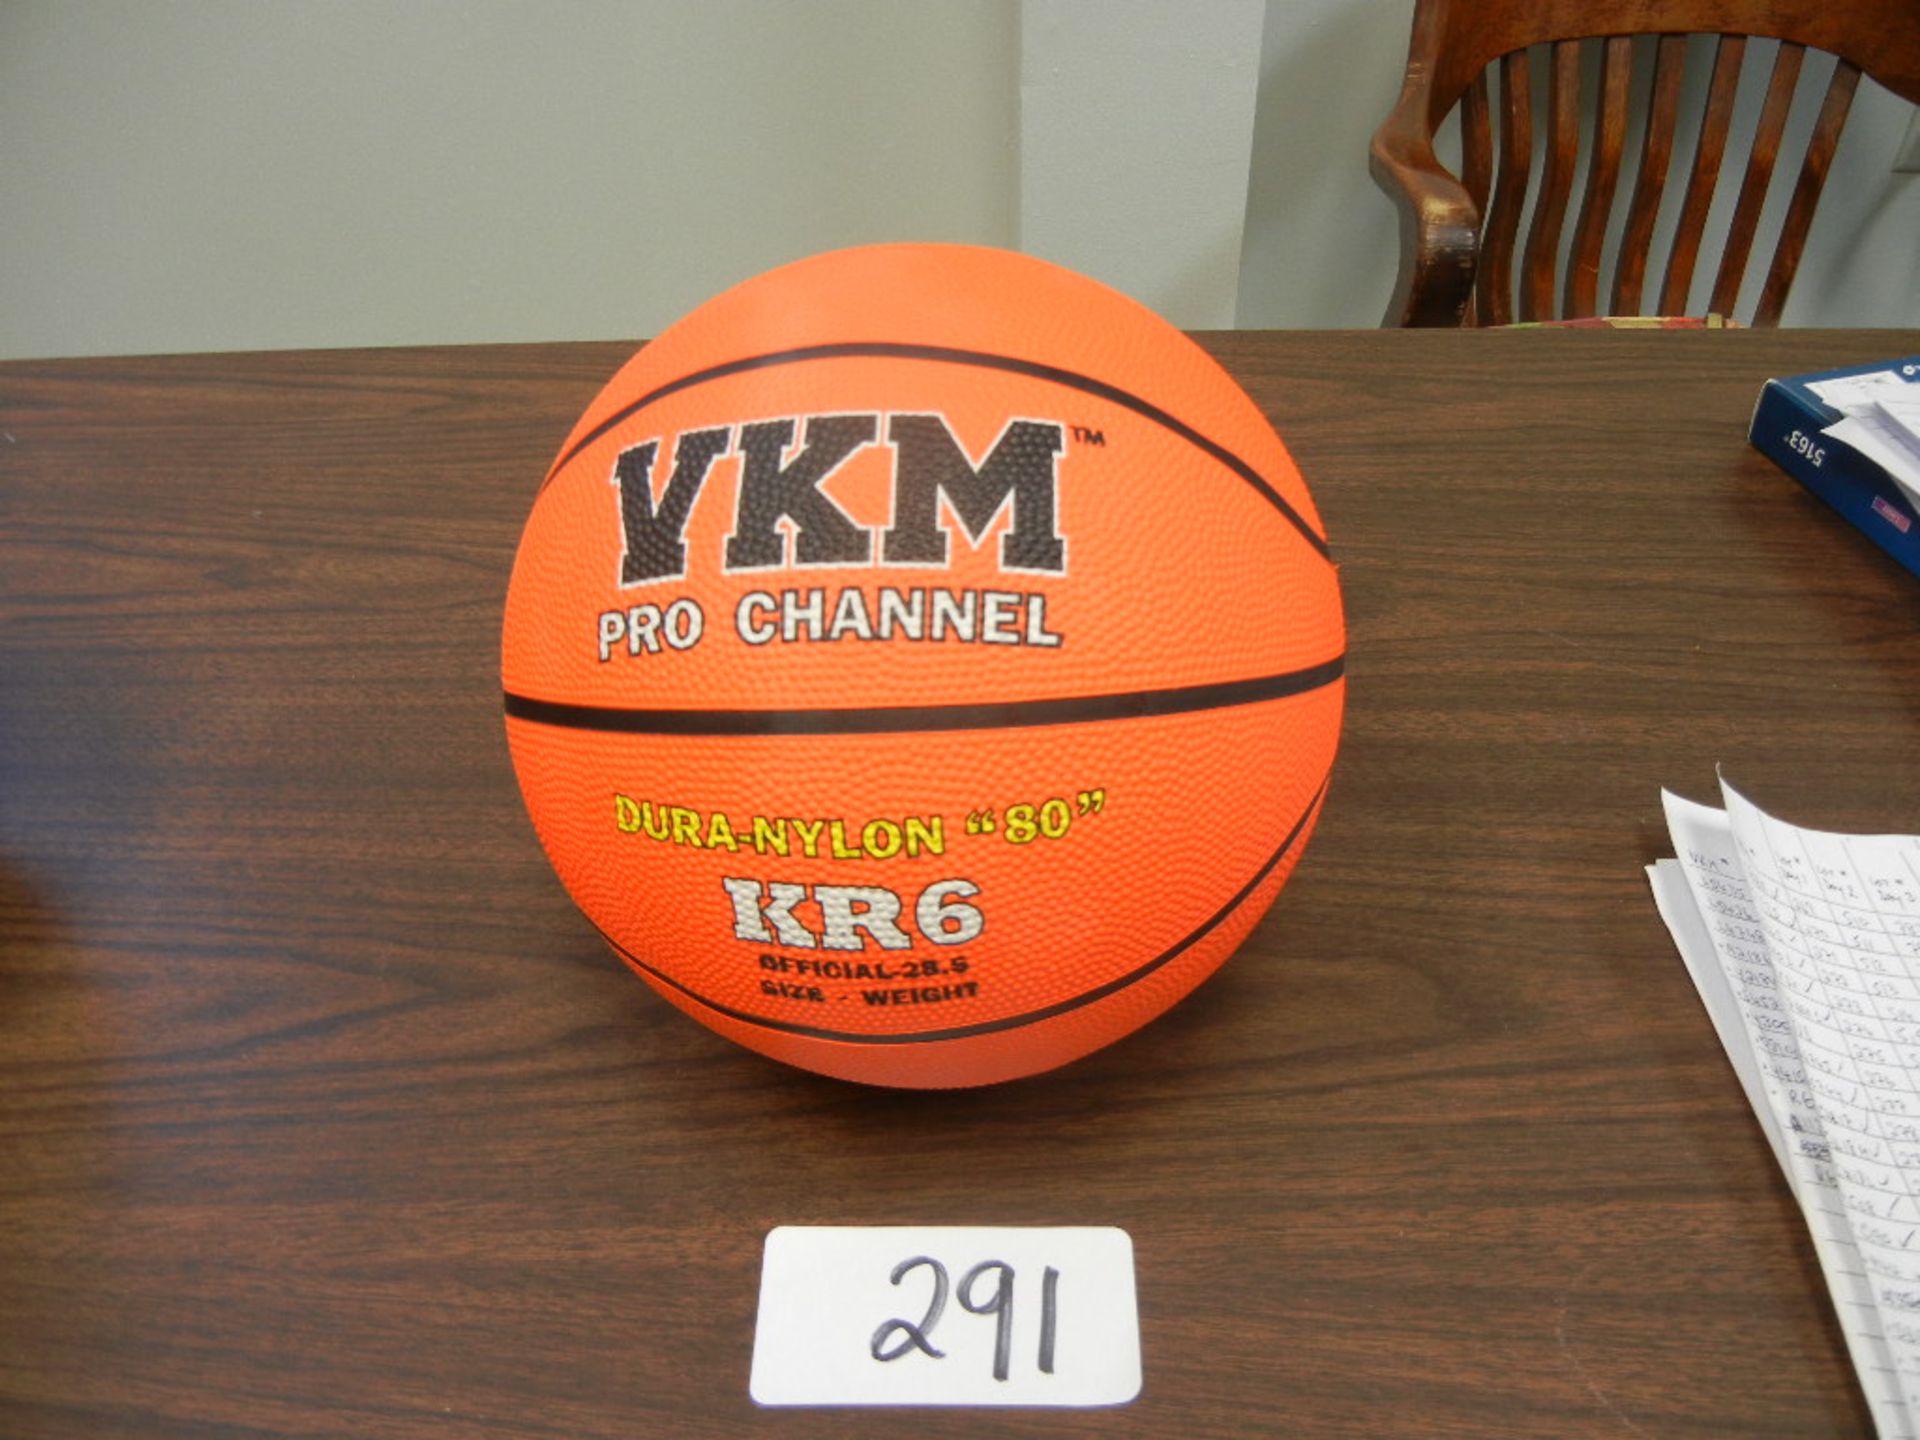 Basketball, High Quality Rubber Cover Int. Size 6, 28 1/2" VKM#KR6